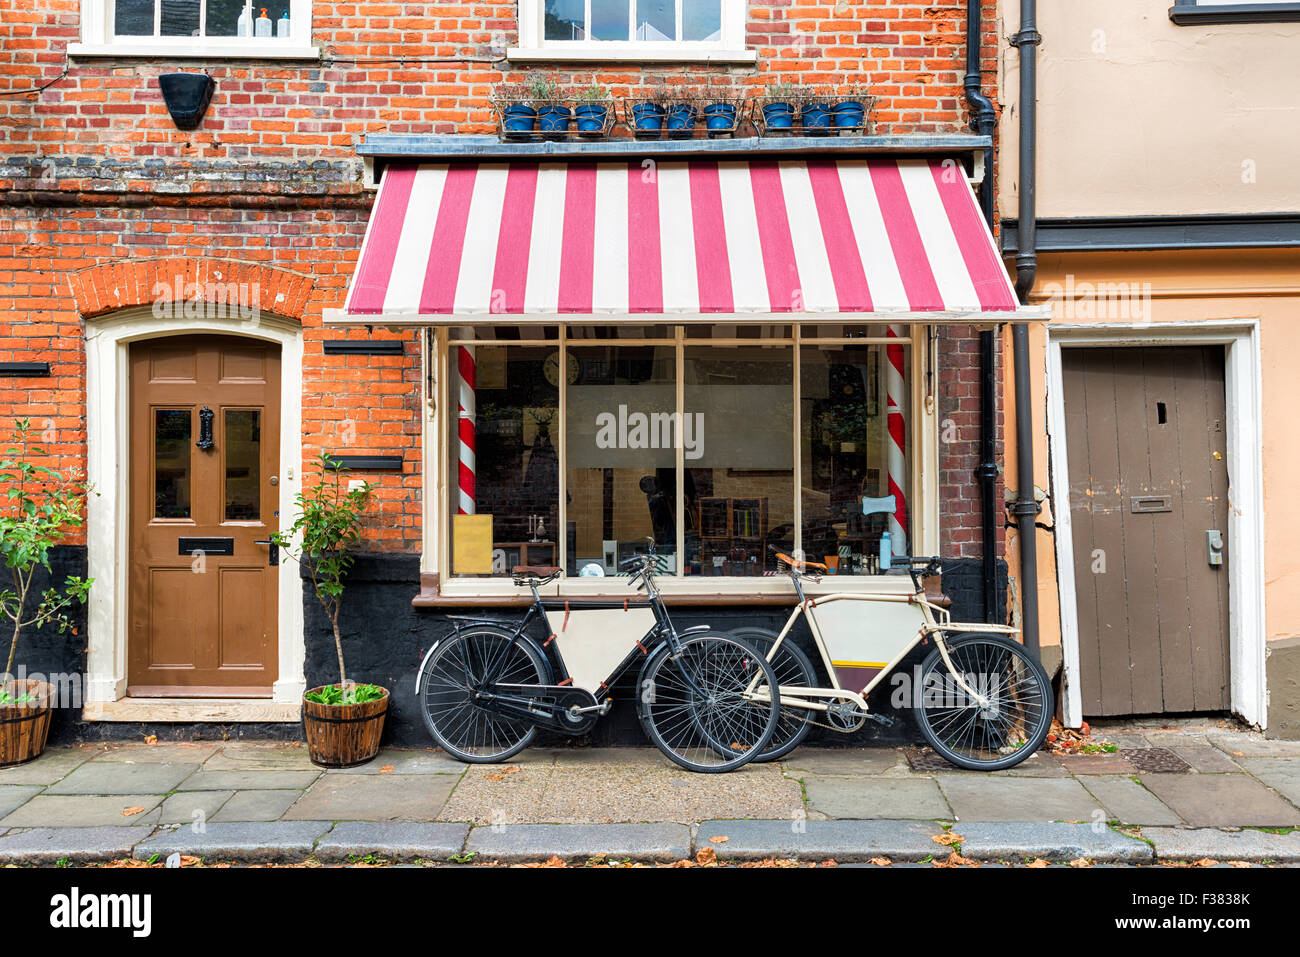 A traditional barber shop with bicycles outside Stock Photo